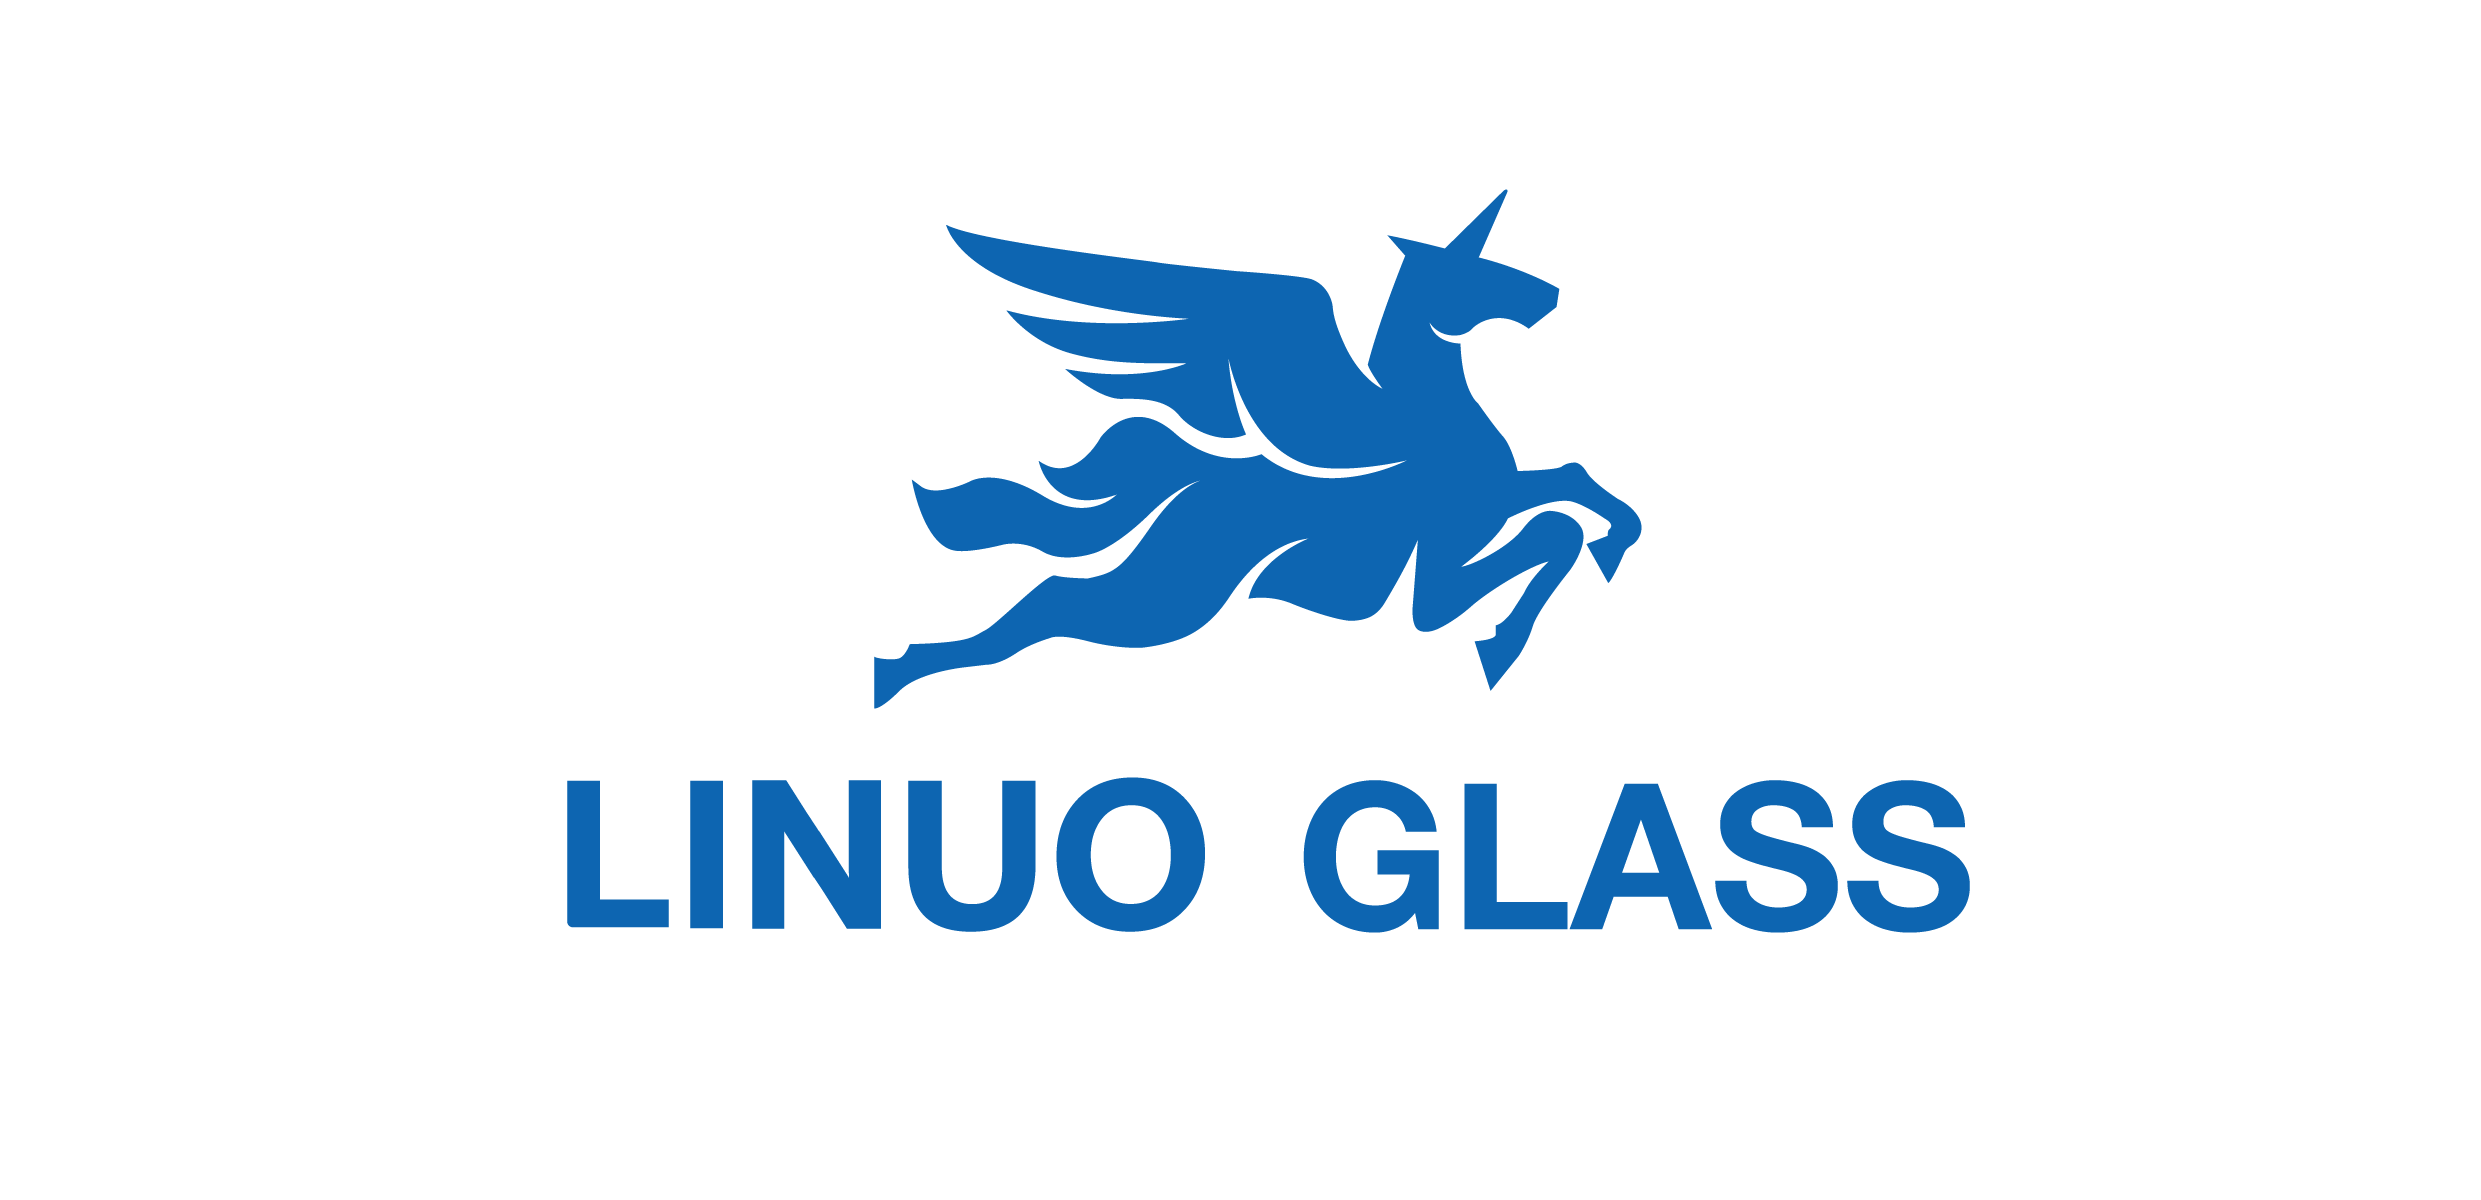 Linuo Glass：The world's largest producer of high borosilicate heat-resistant glass.